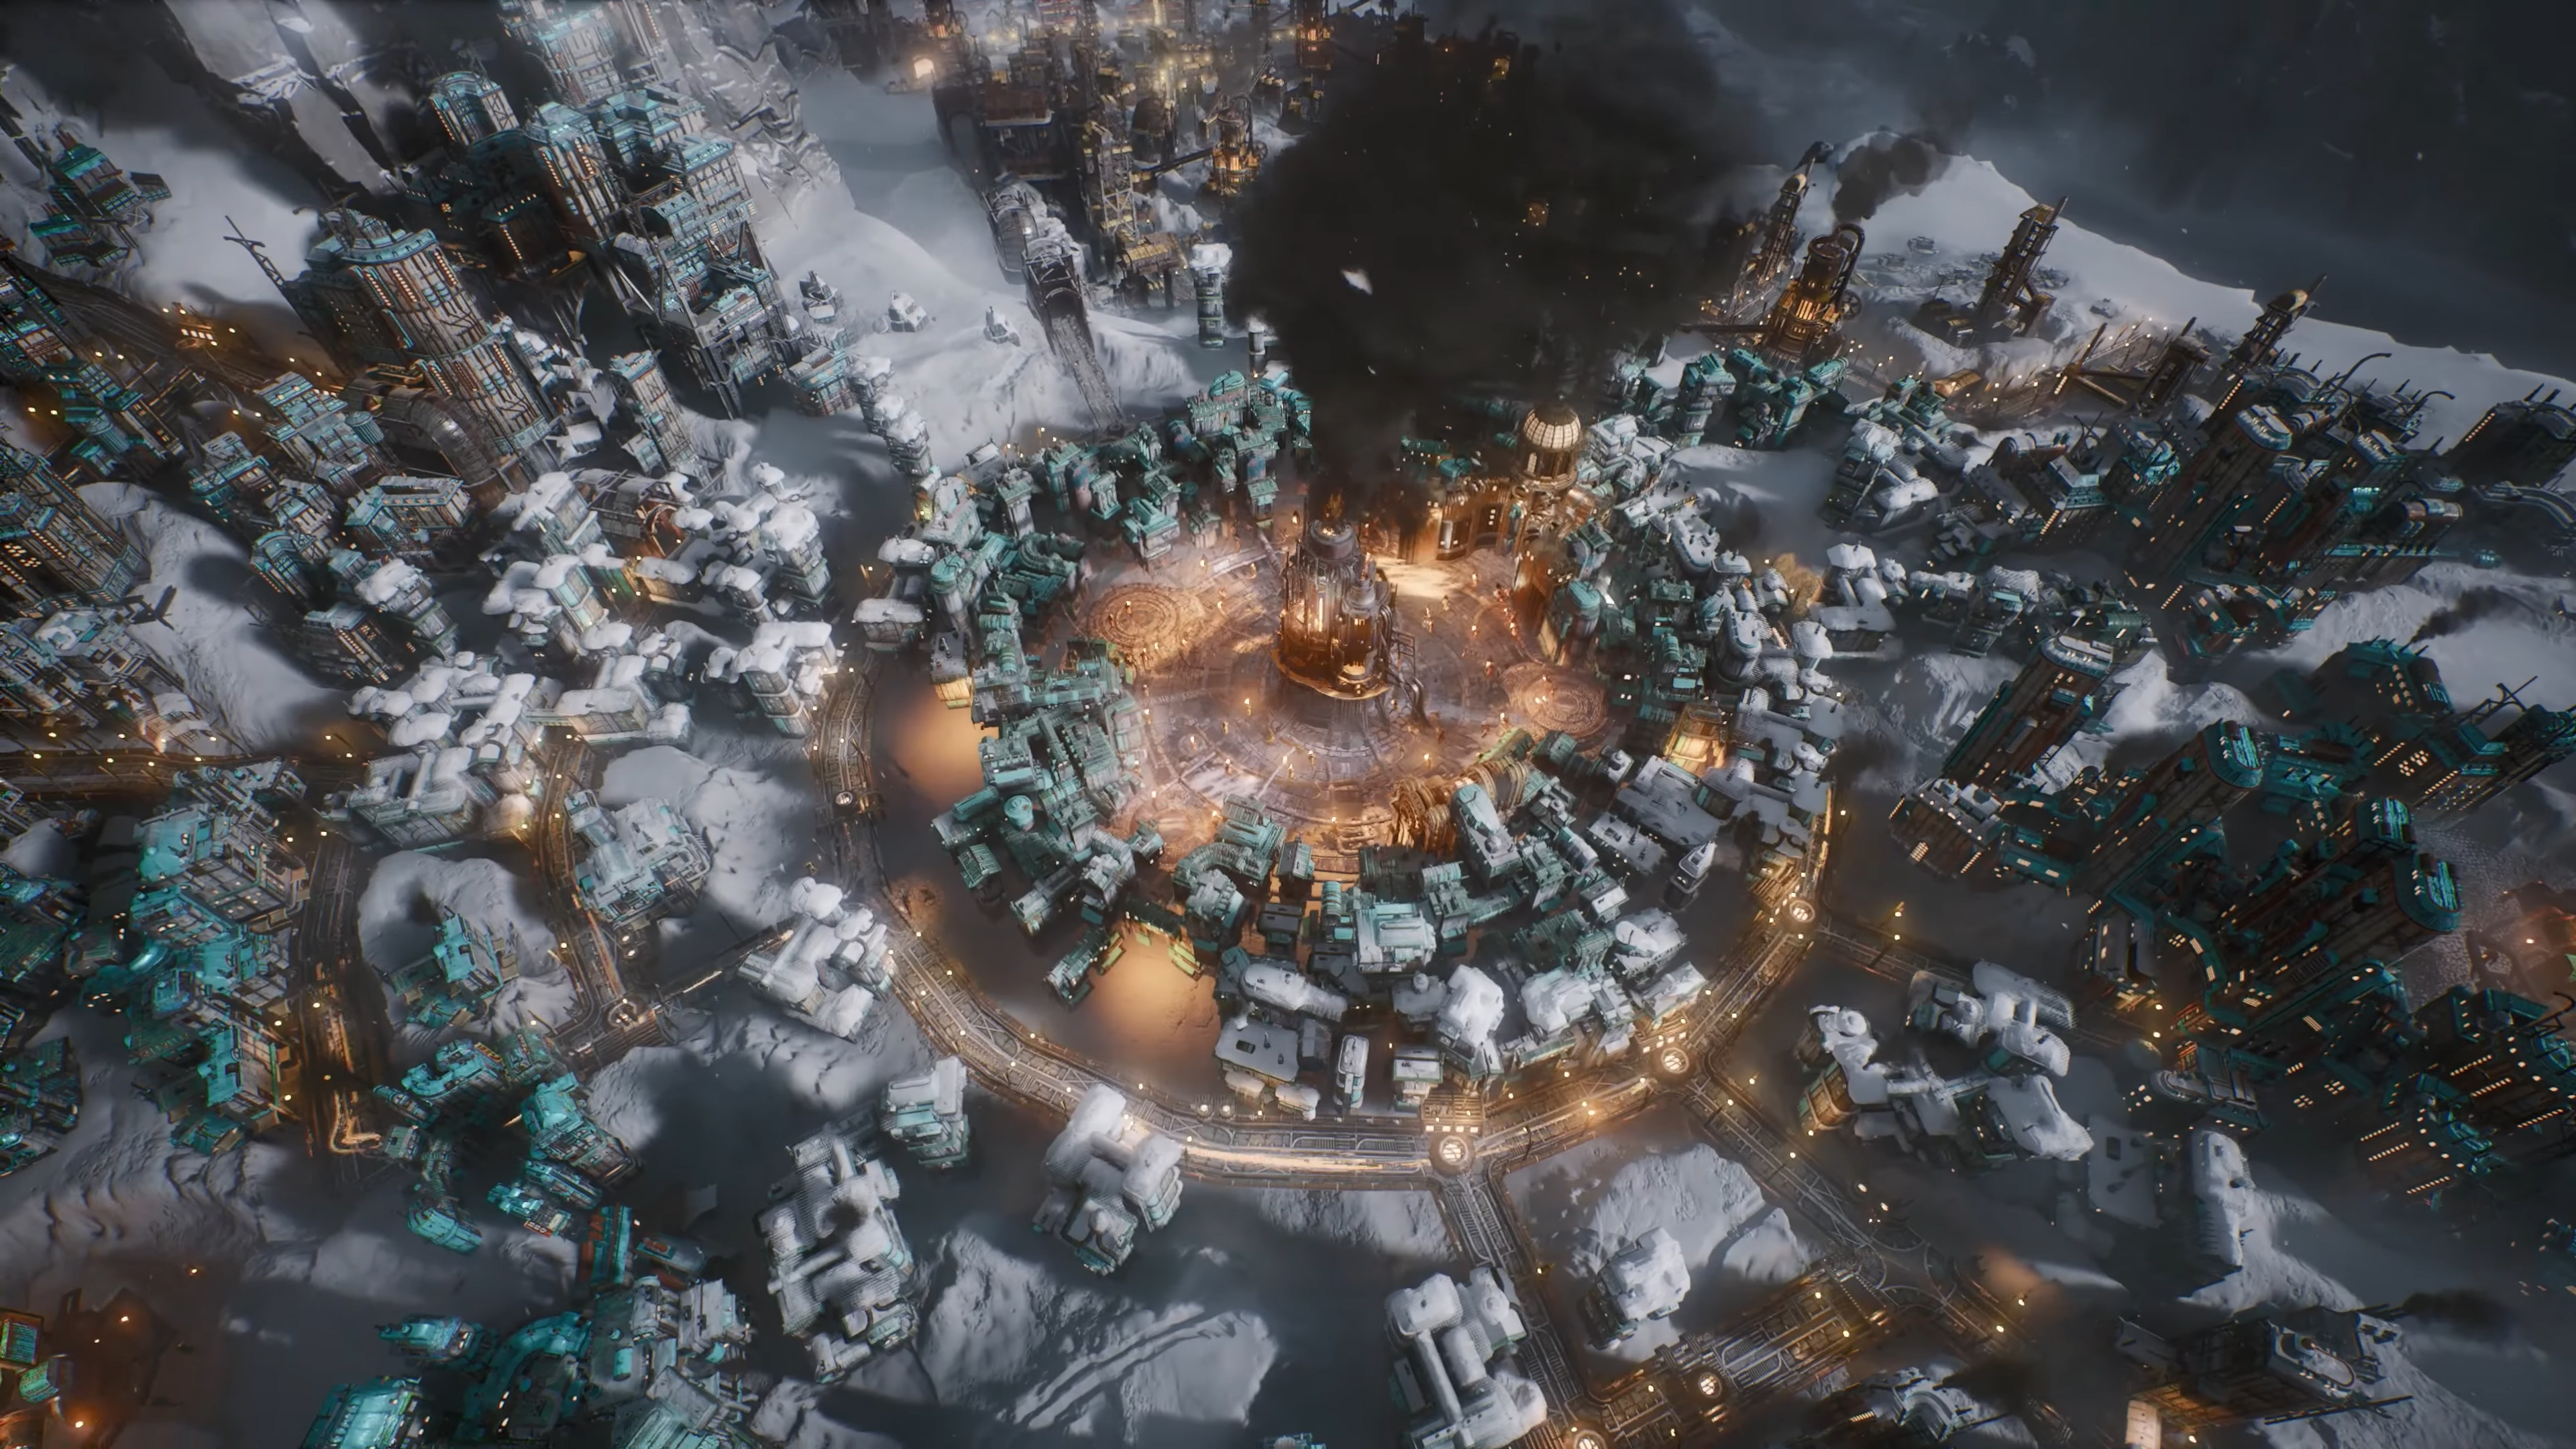  The Frostpunk 2 release date trailer is here, along with two ways to play the survival city builder before launch 